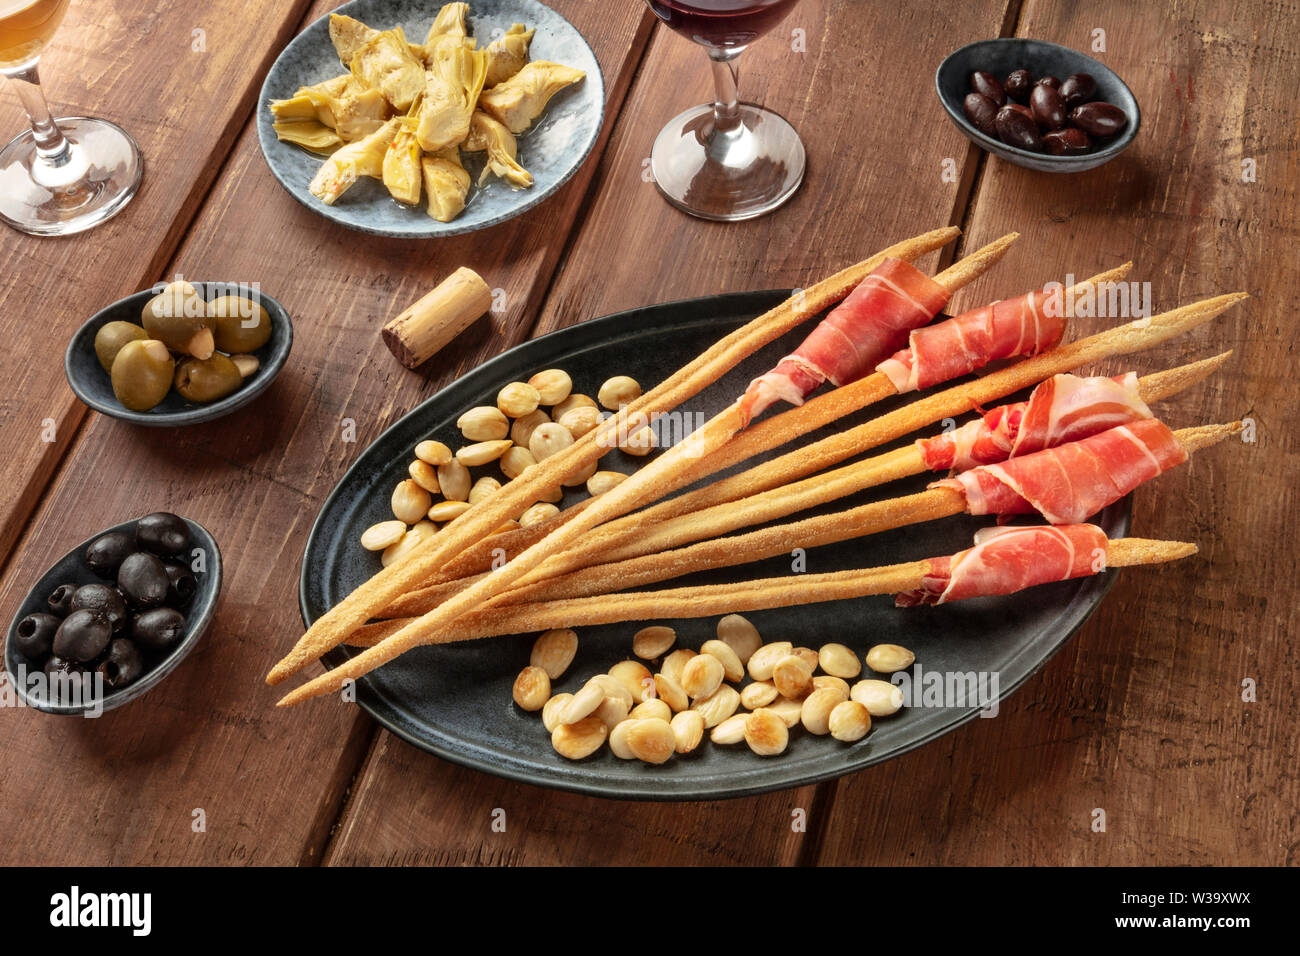 Italian antipasti. Grissini breadsticks with prosciutto di parma and roasted almonds, with olives and artichokes, with wine glasses Stock Photo